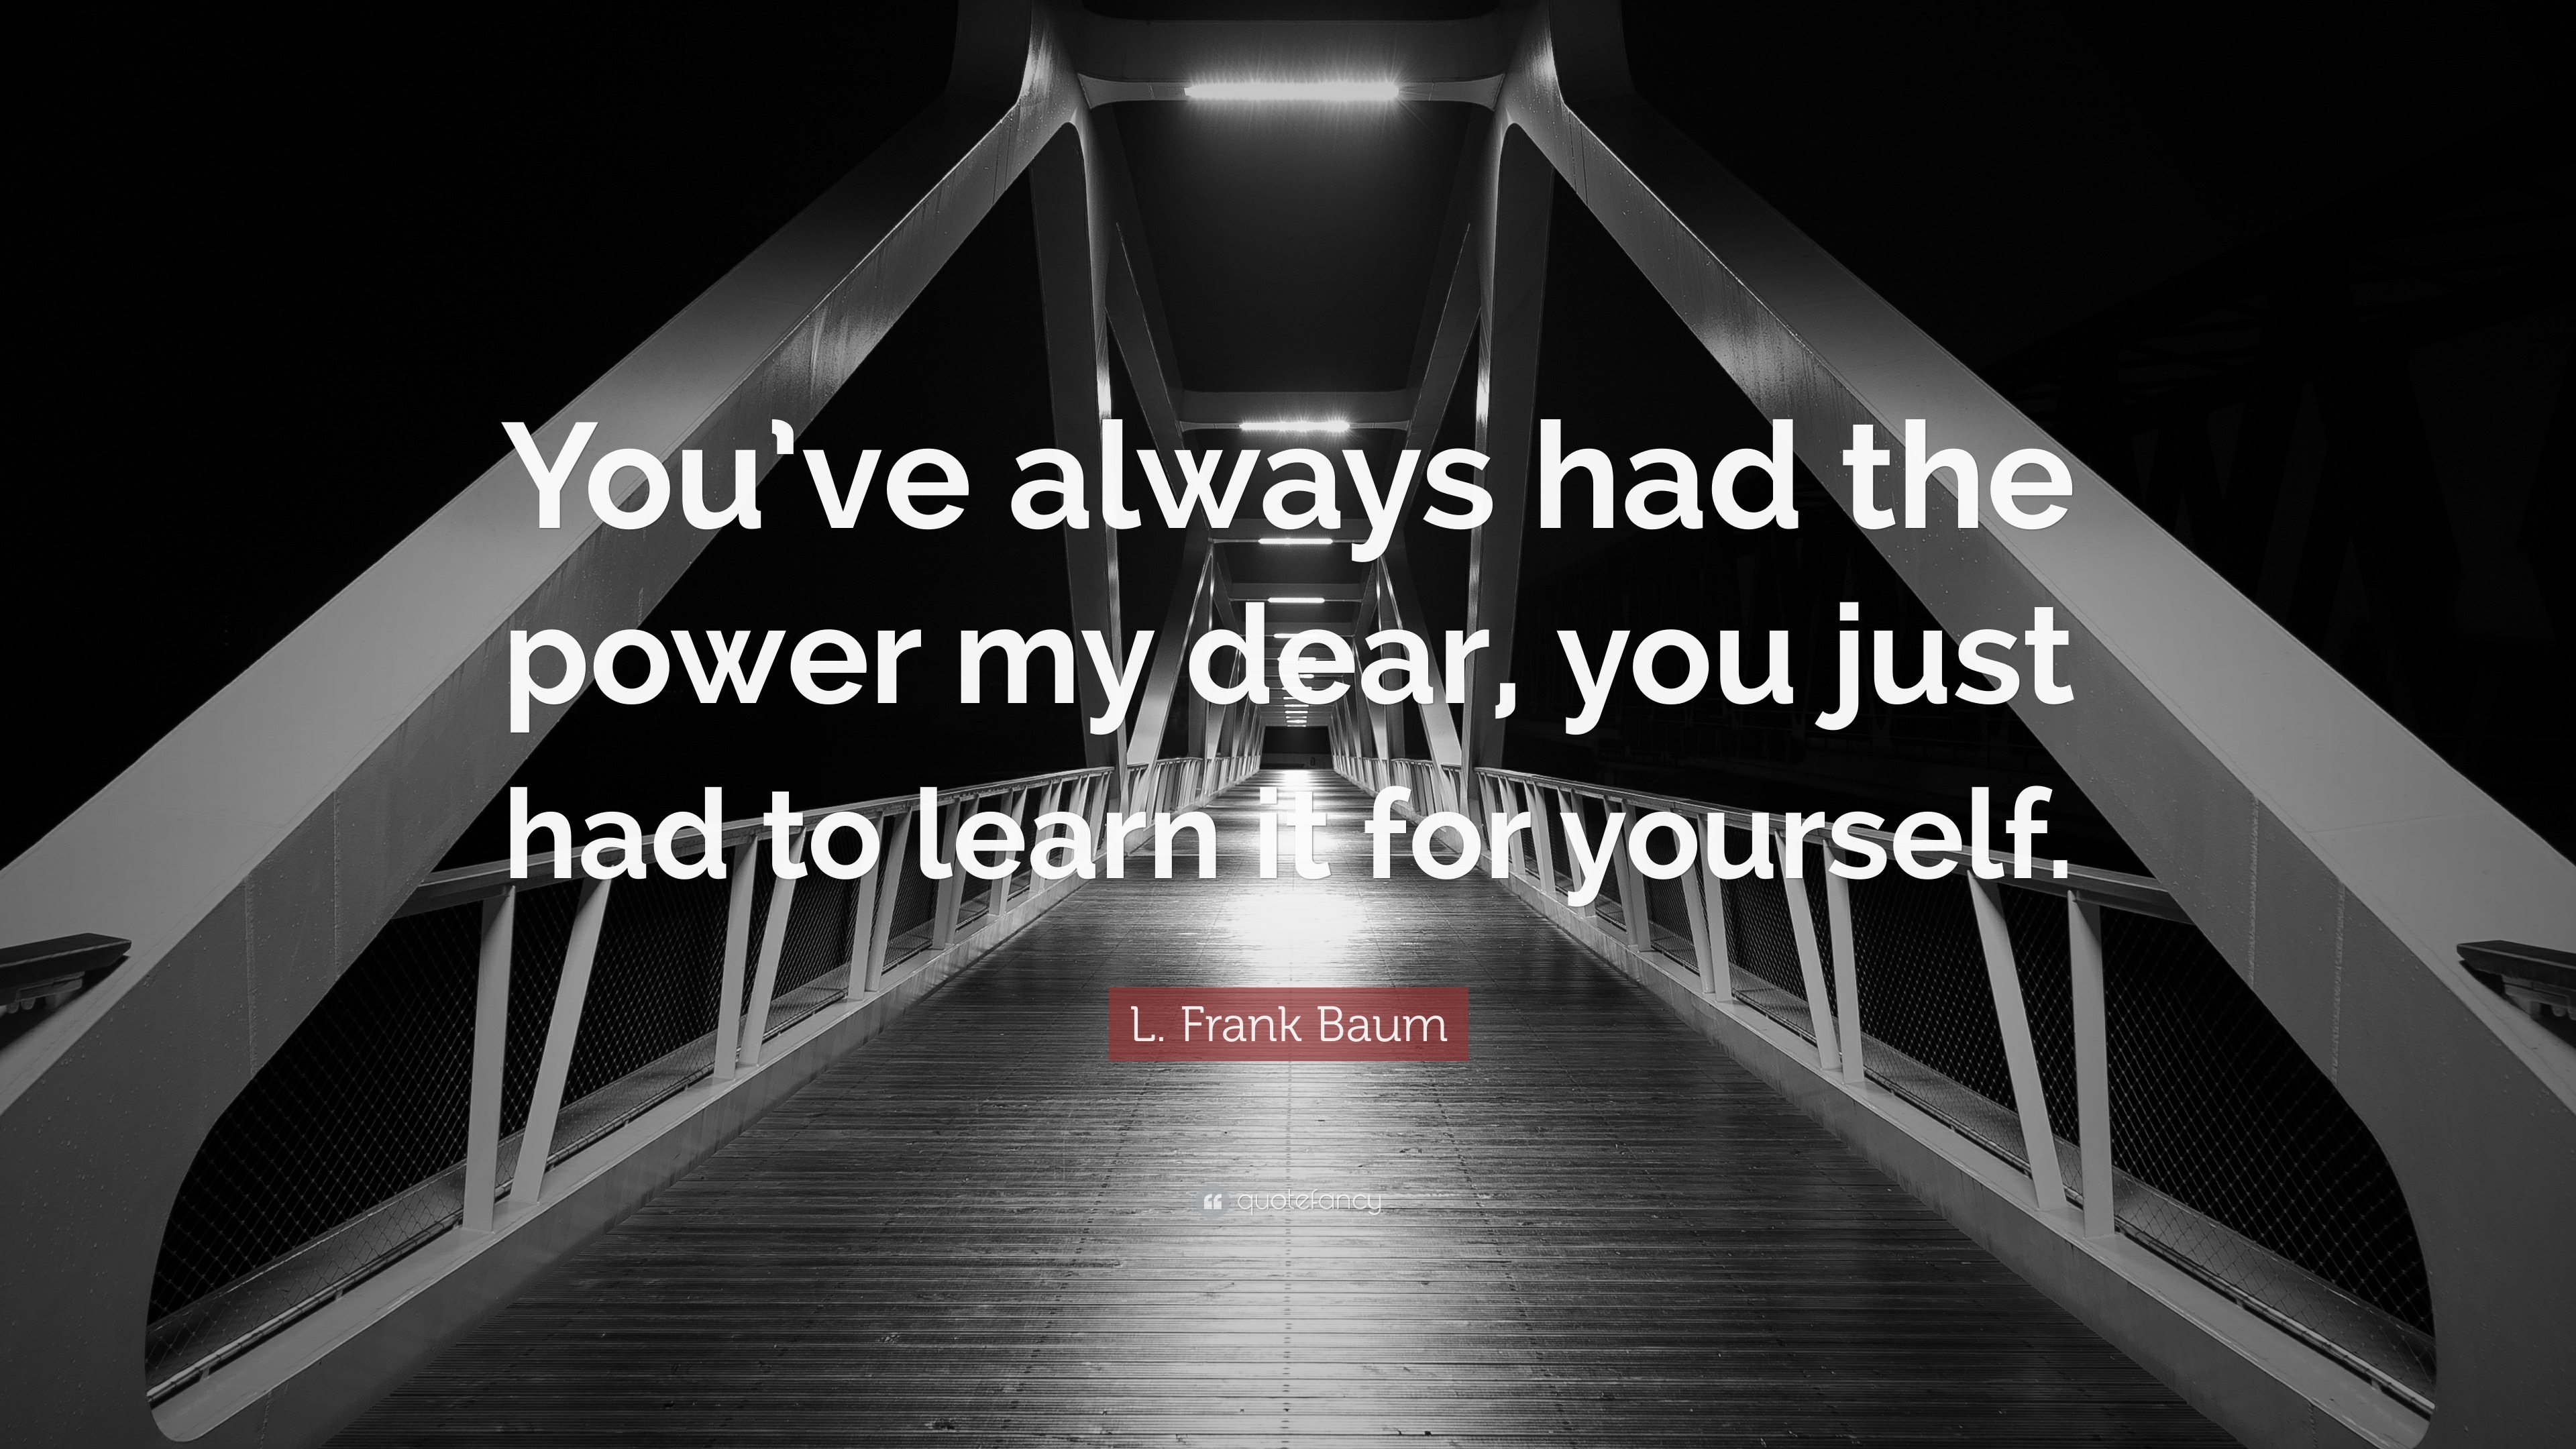 L. Frank Baum Quote: “You've always had the power my dear, you just had to